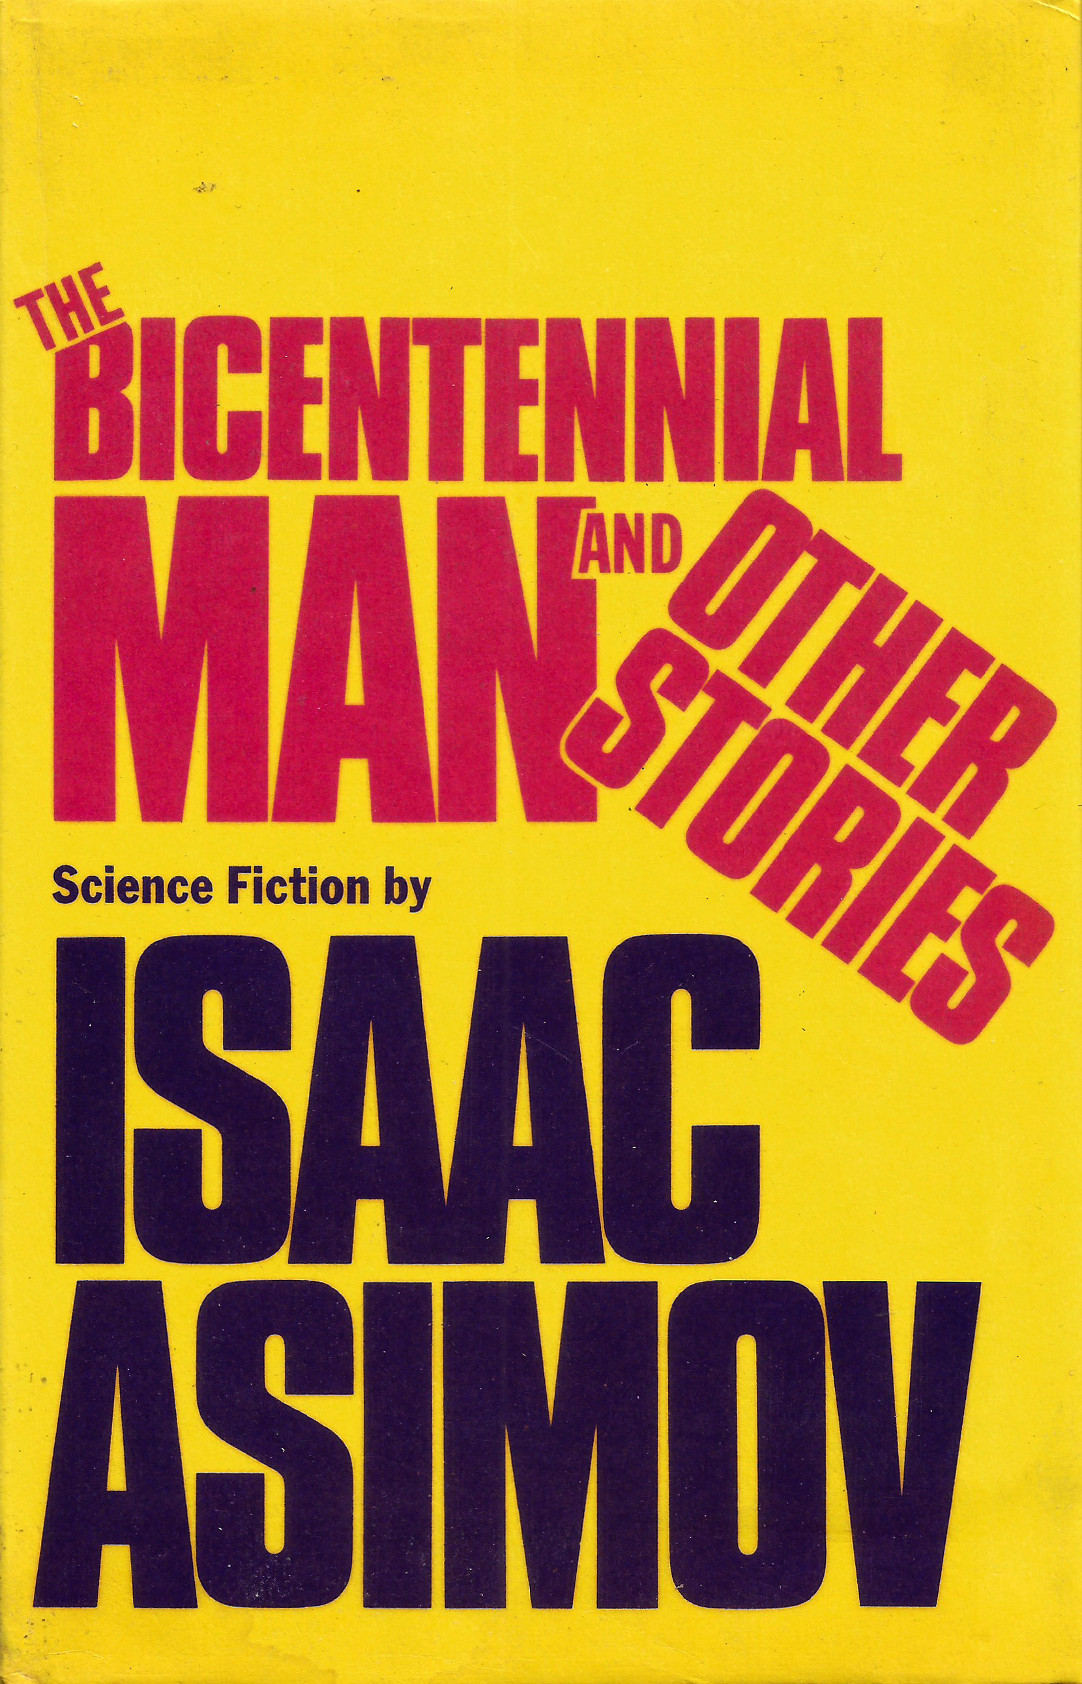 The Bicentennial Man And Other Stories, by Isaac Asimov (Book Club Associates, 1977).From